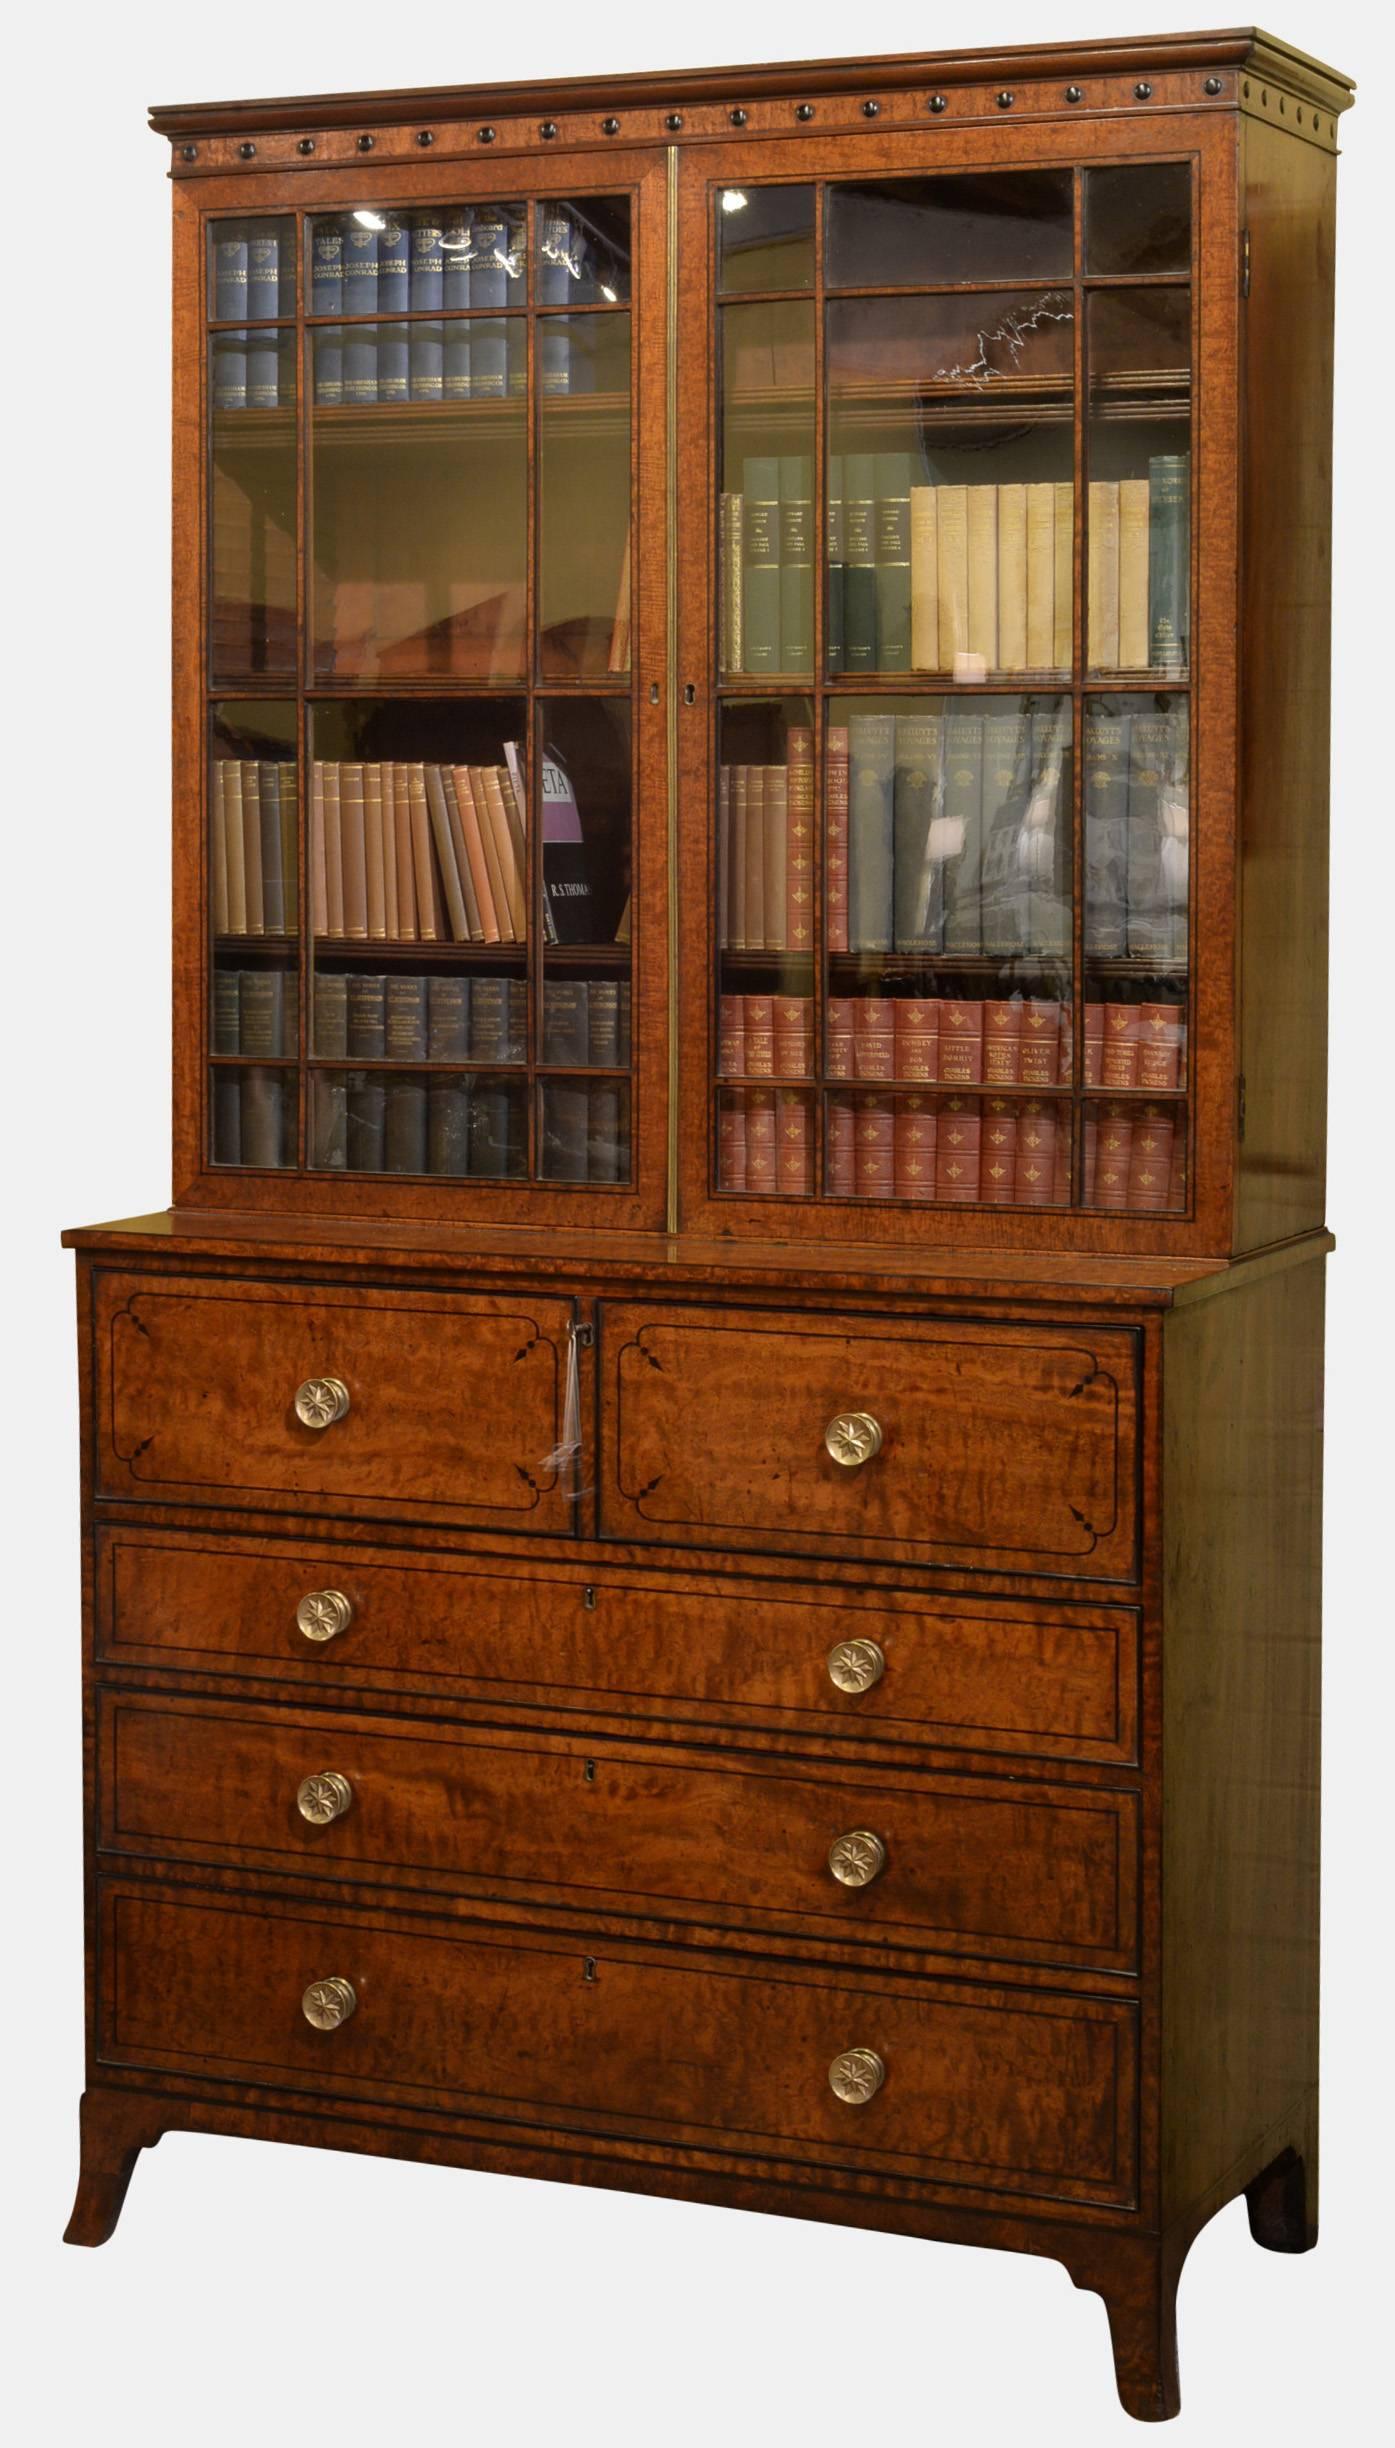 A fine English Regency mahogany secretaire bookcase of superb figure and colour. Inlaid throughout with ebony, the upper case with adjustable shelves, 

circa 1810.